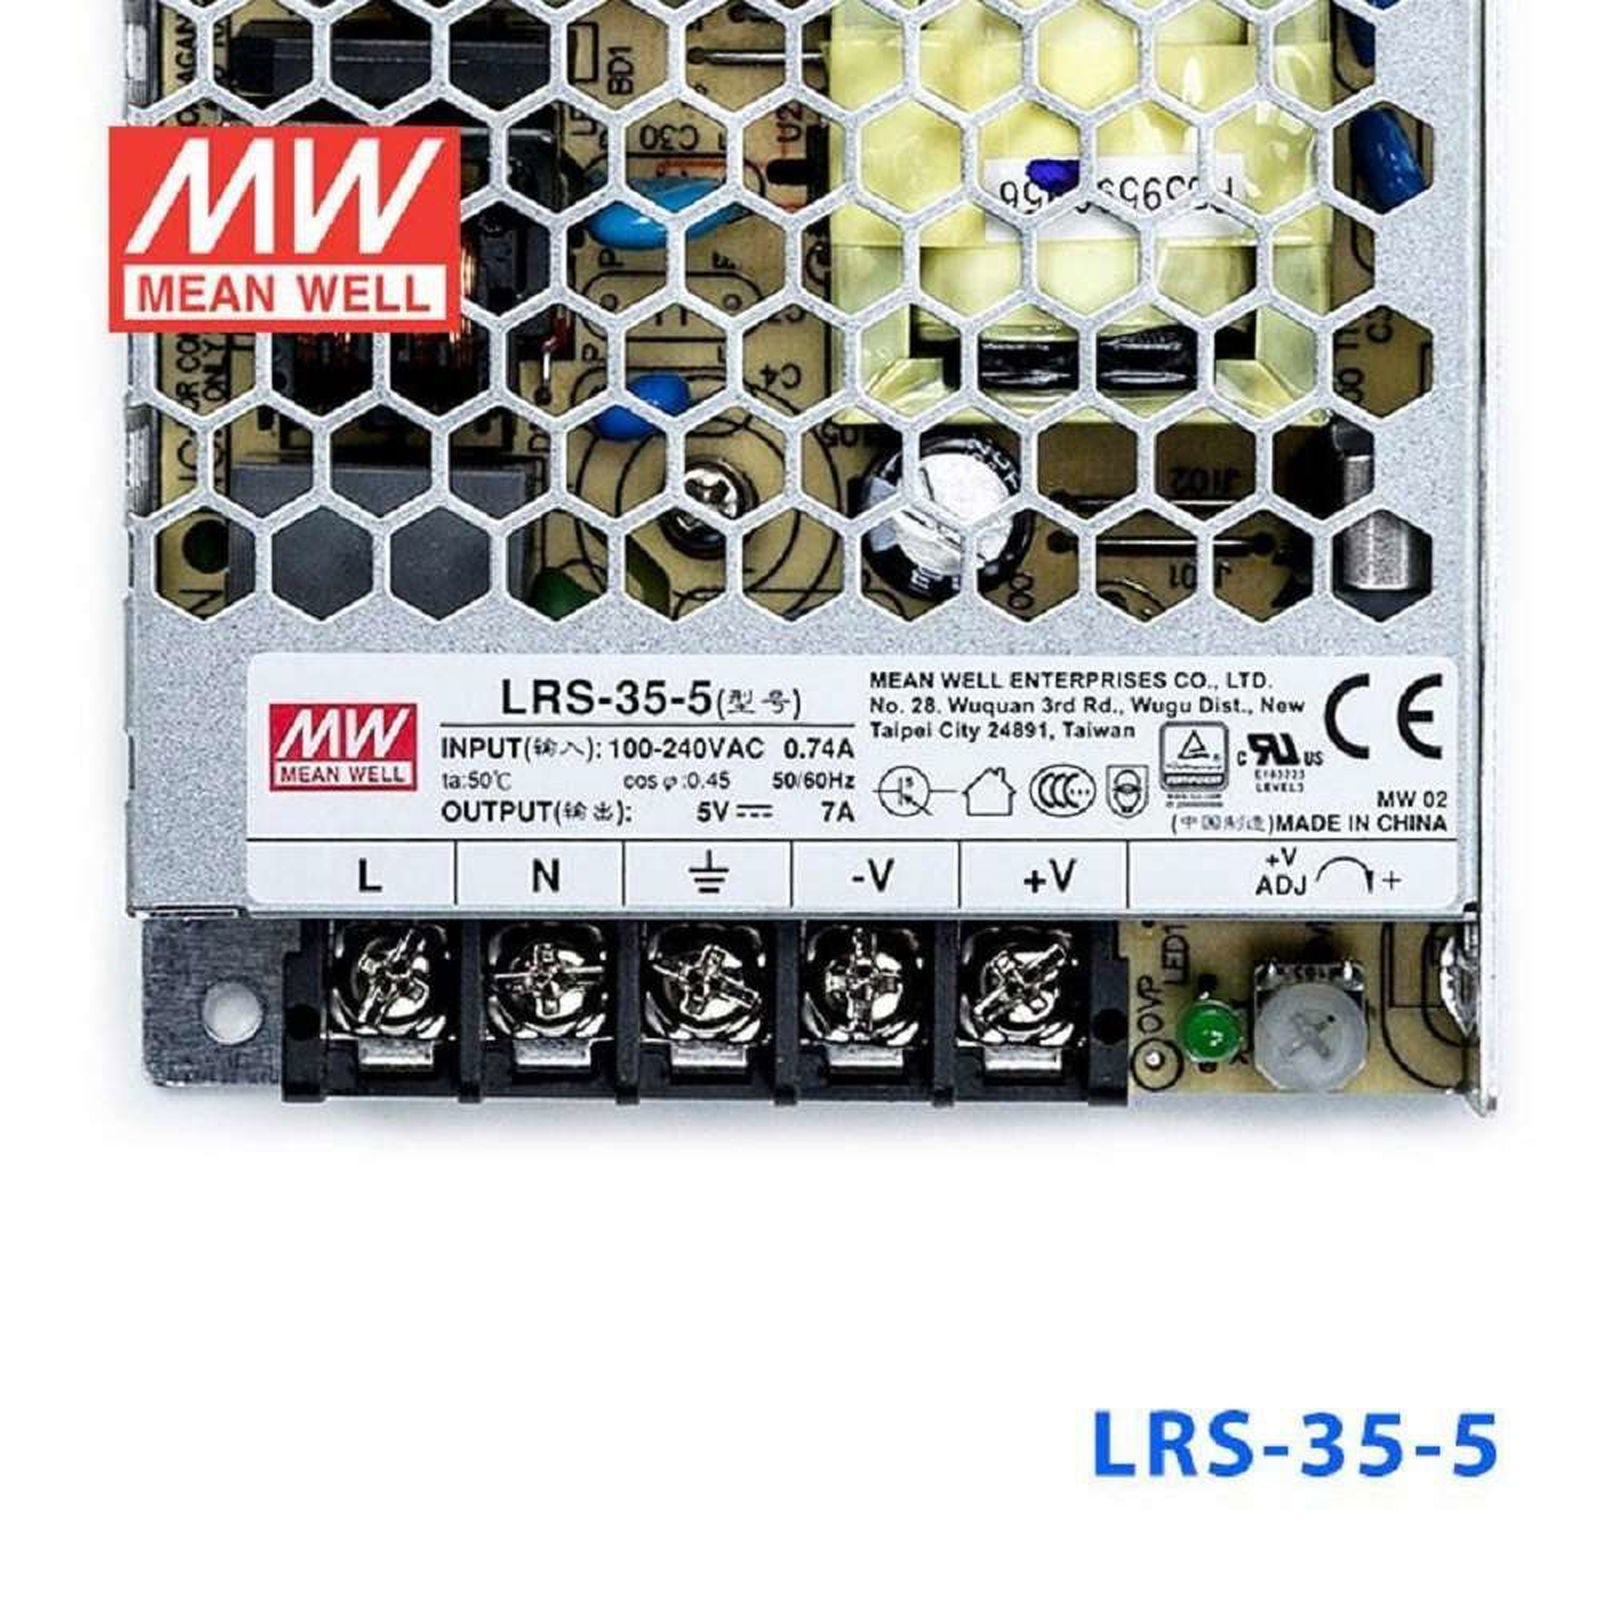 Mean well Lrs-35-5 Smps power supply, 5vdc, 7amp rated - voltkart - MEANWELL - 